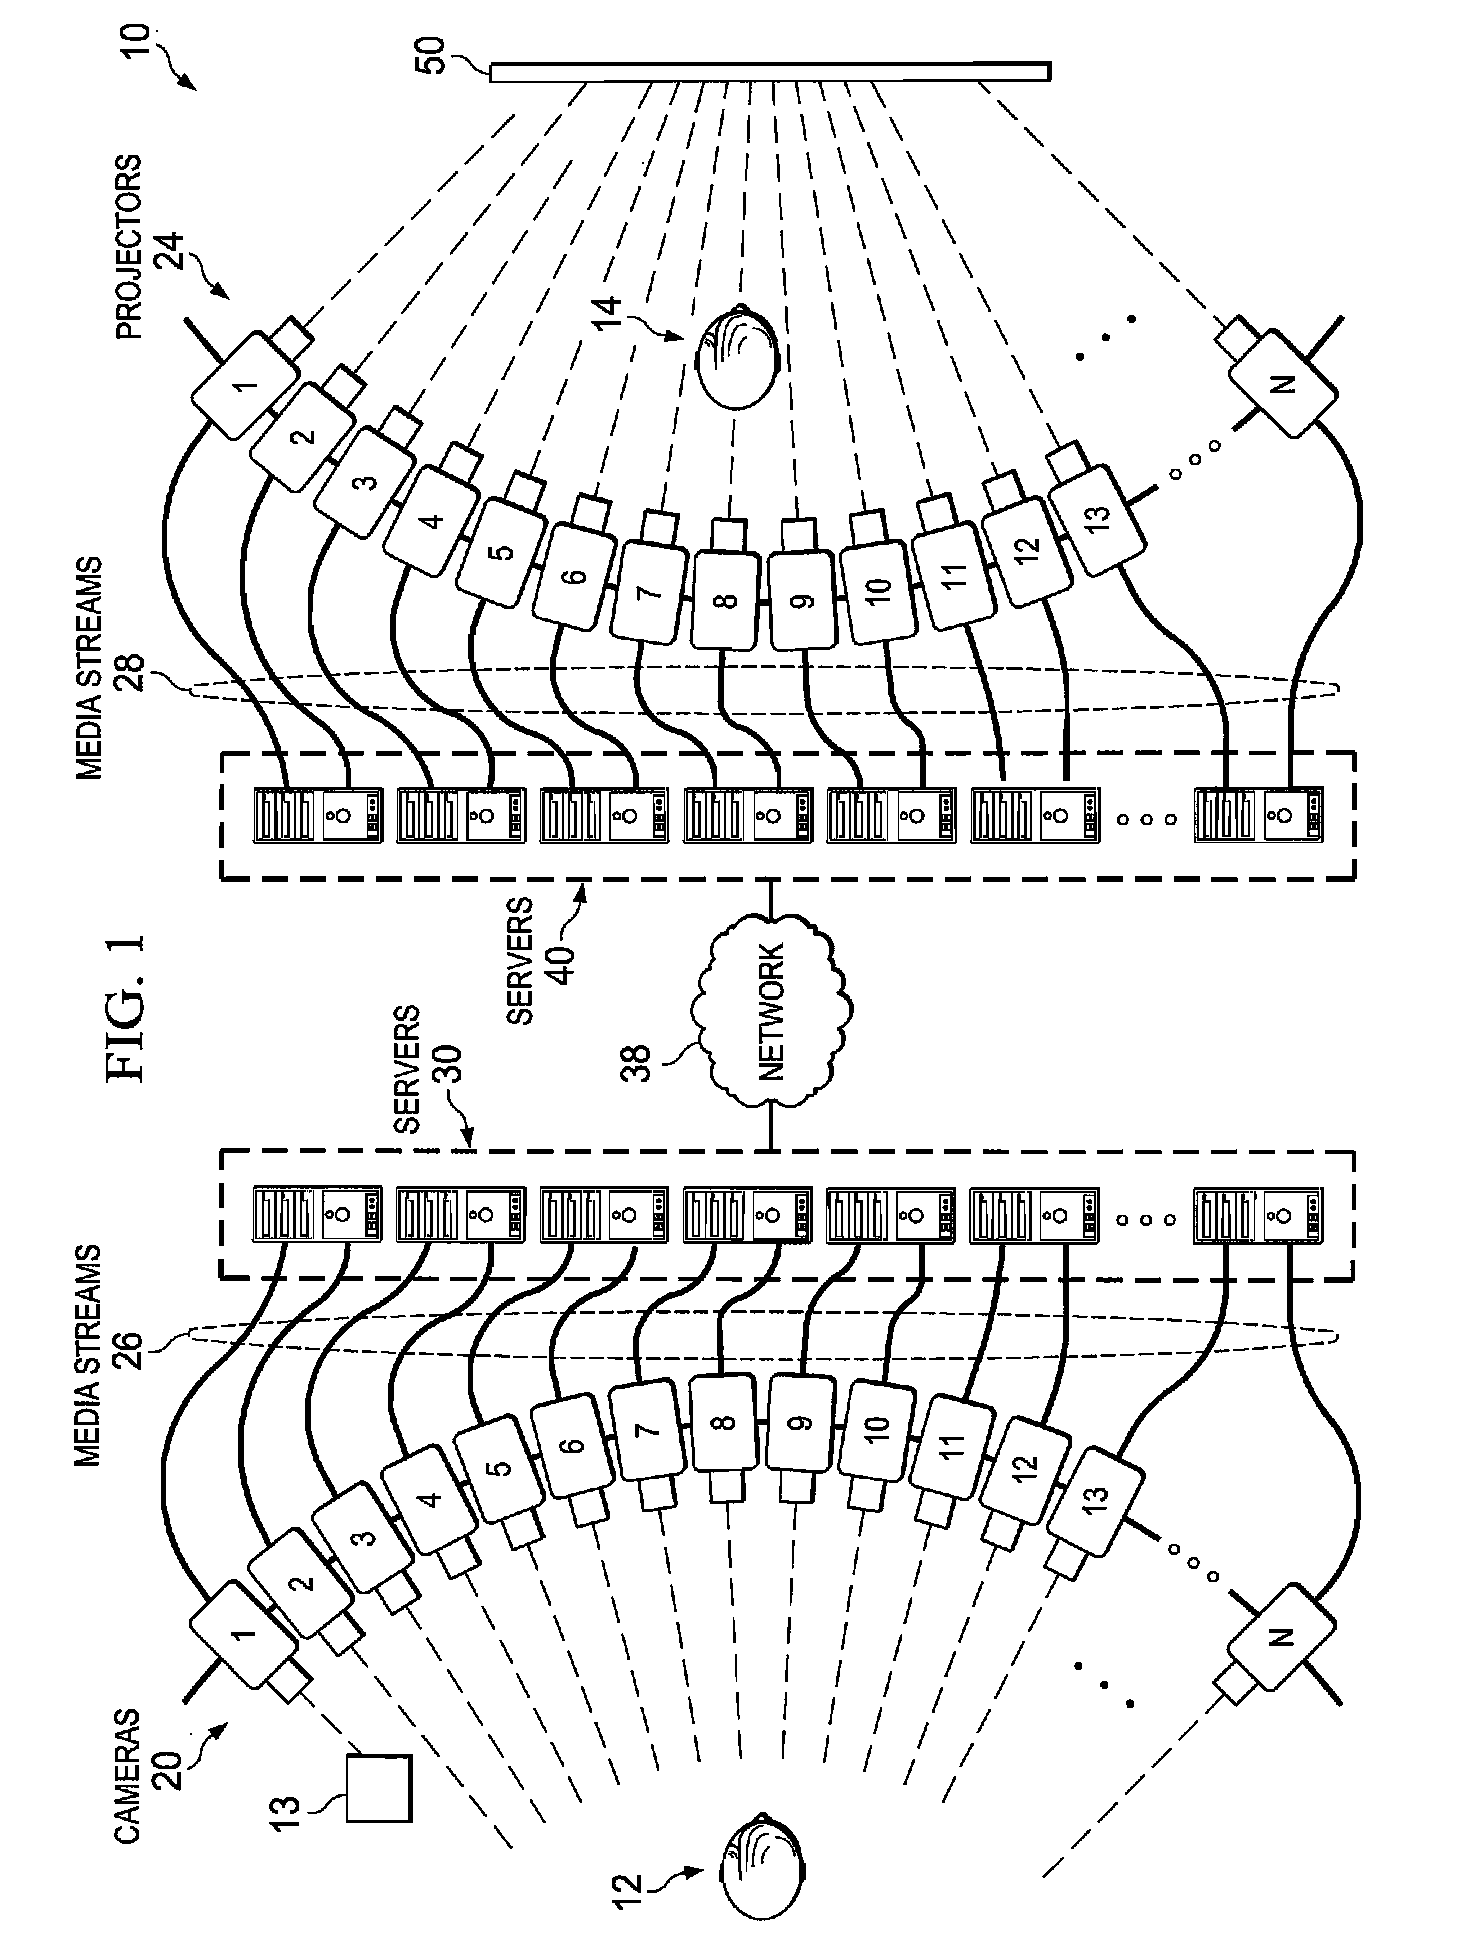 System and method for providing three dimensional imaging in a network environment